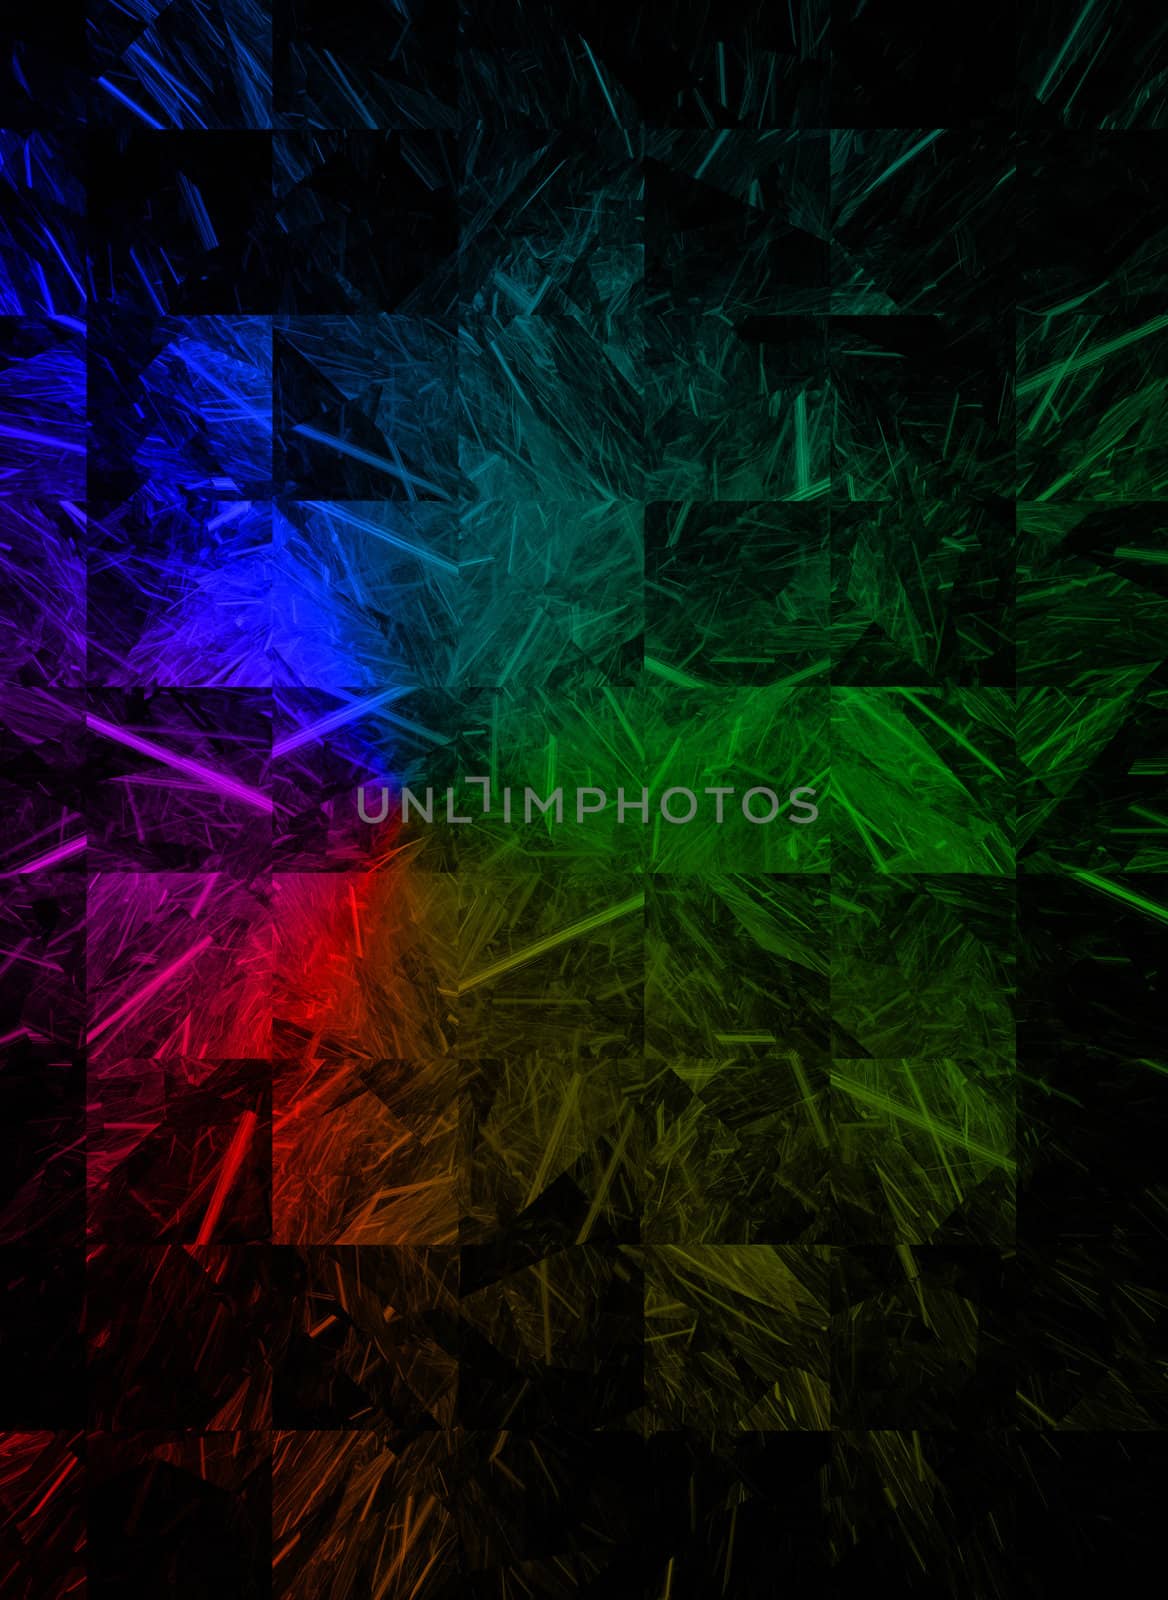 Design colorful, multicolor abstract background by FernandoCortes